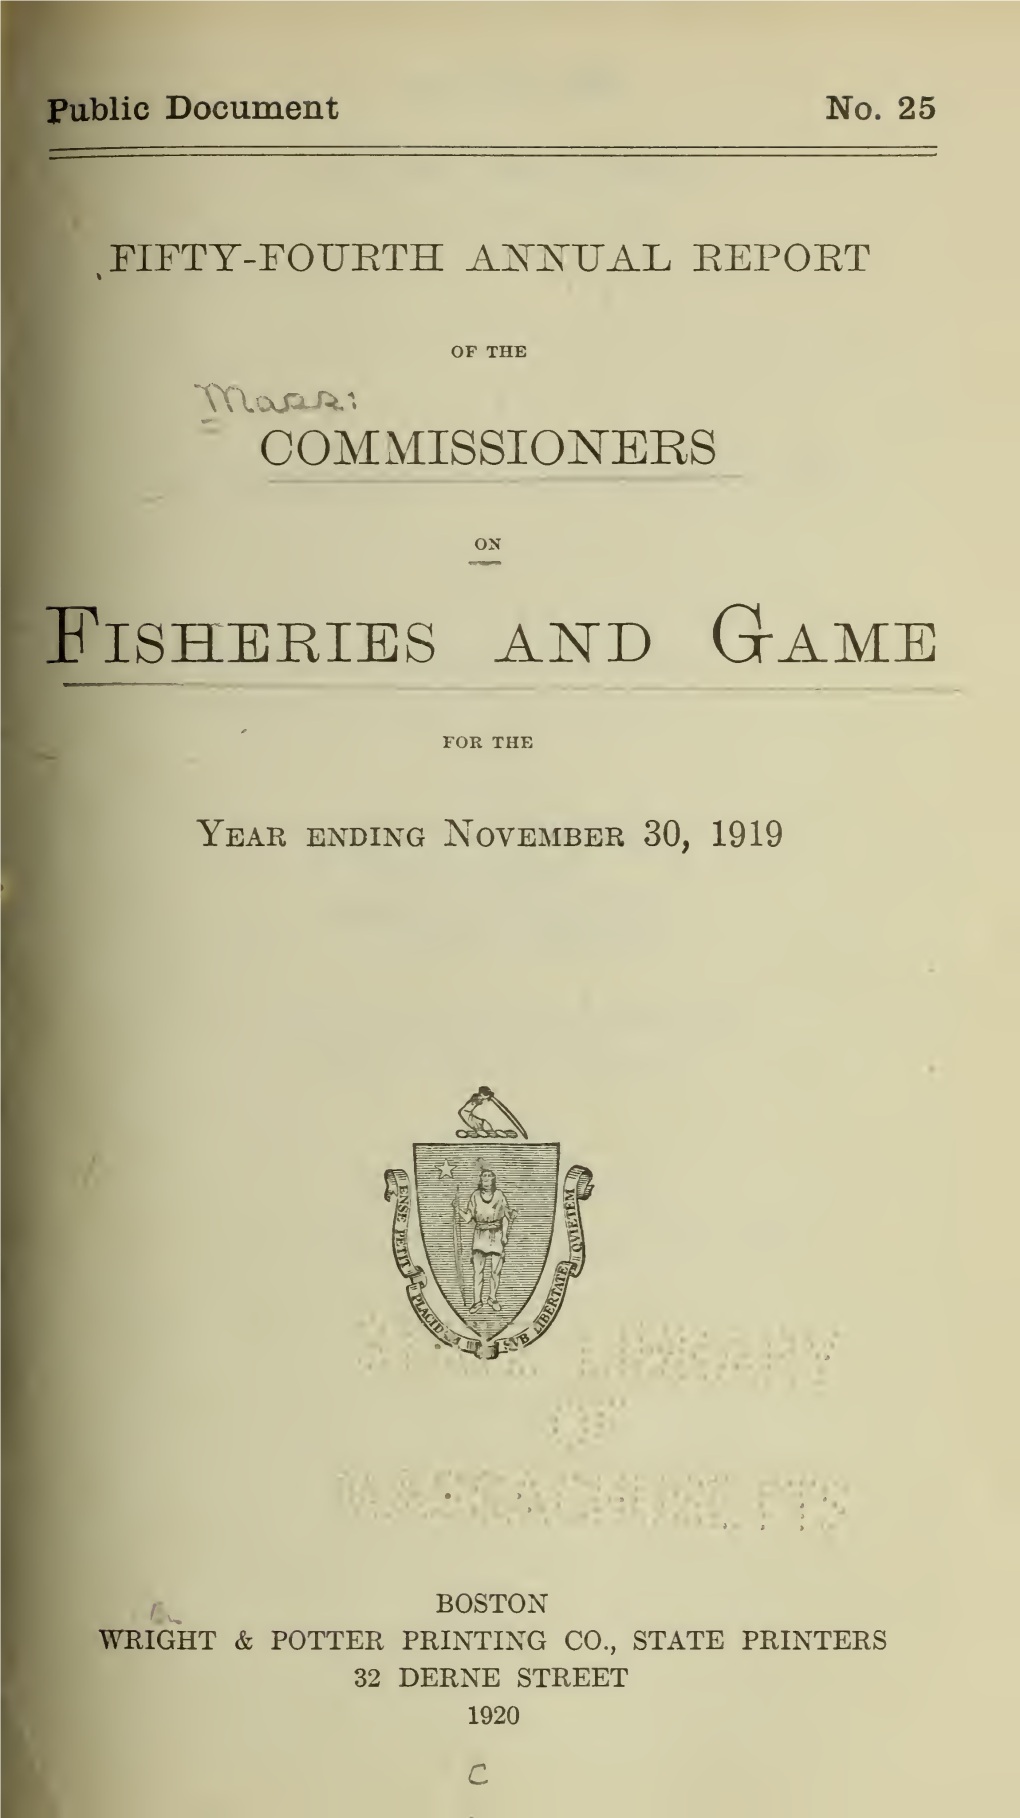 Annual Report of Commissioners on Fisheries and Game of Massachusetts (1915, 1917-1919)